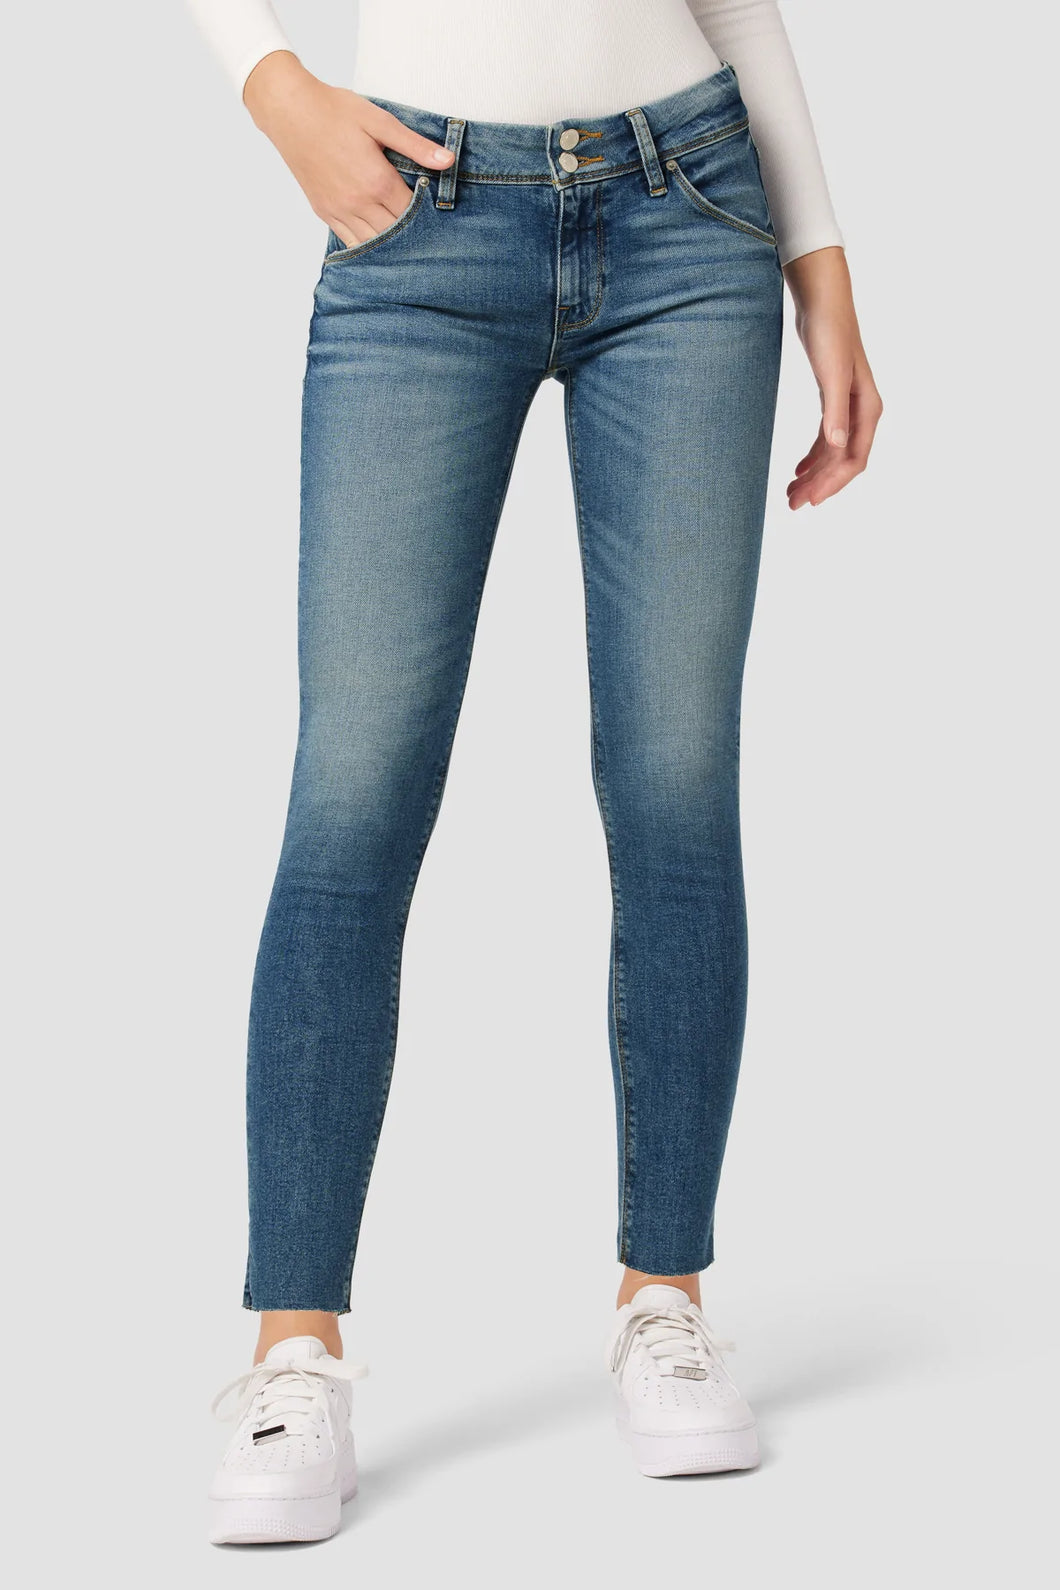 Hudson - Collin Mid-Rise Skinny Ankle Jean